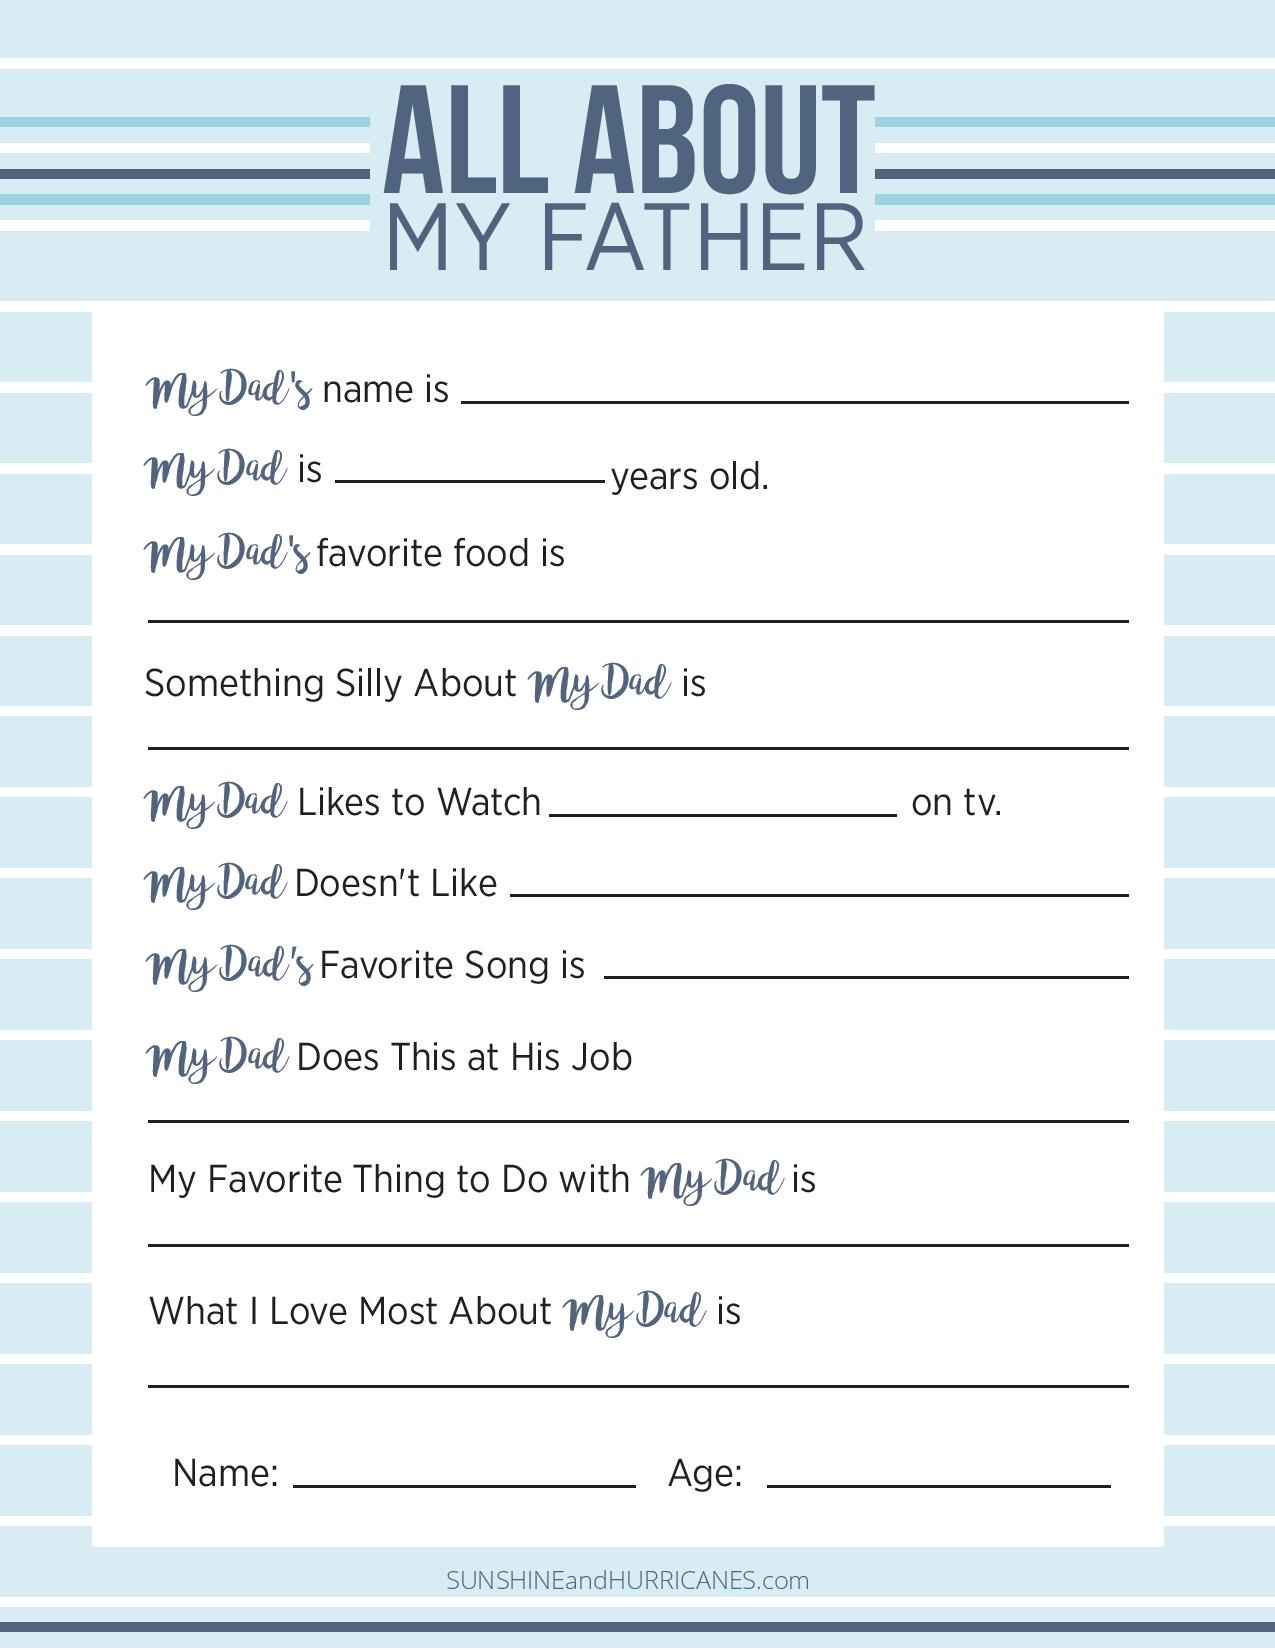 All About My Dad. A fun Father's Day Questionnaire that he is sure to love. SunshineandHurricanes.com